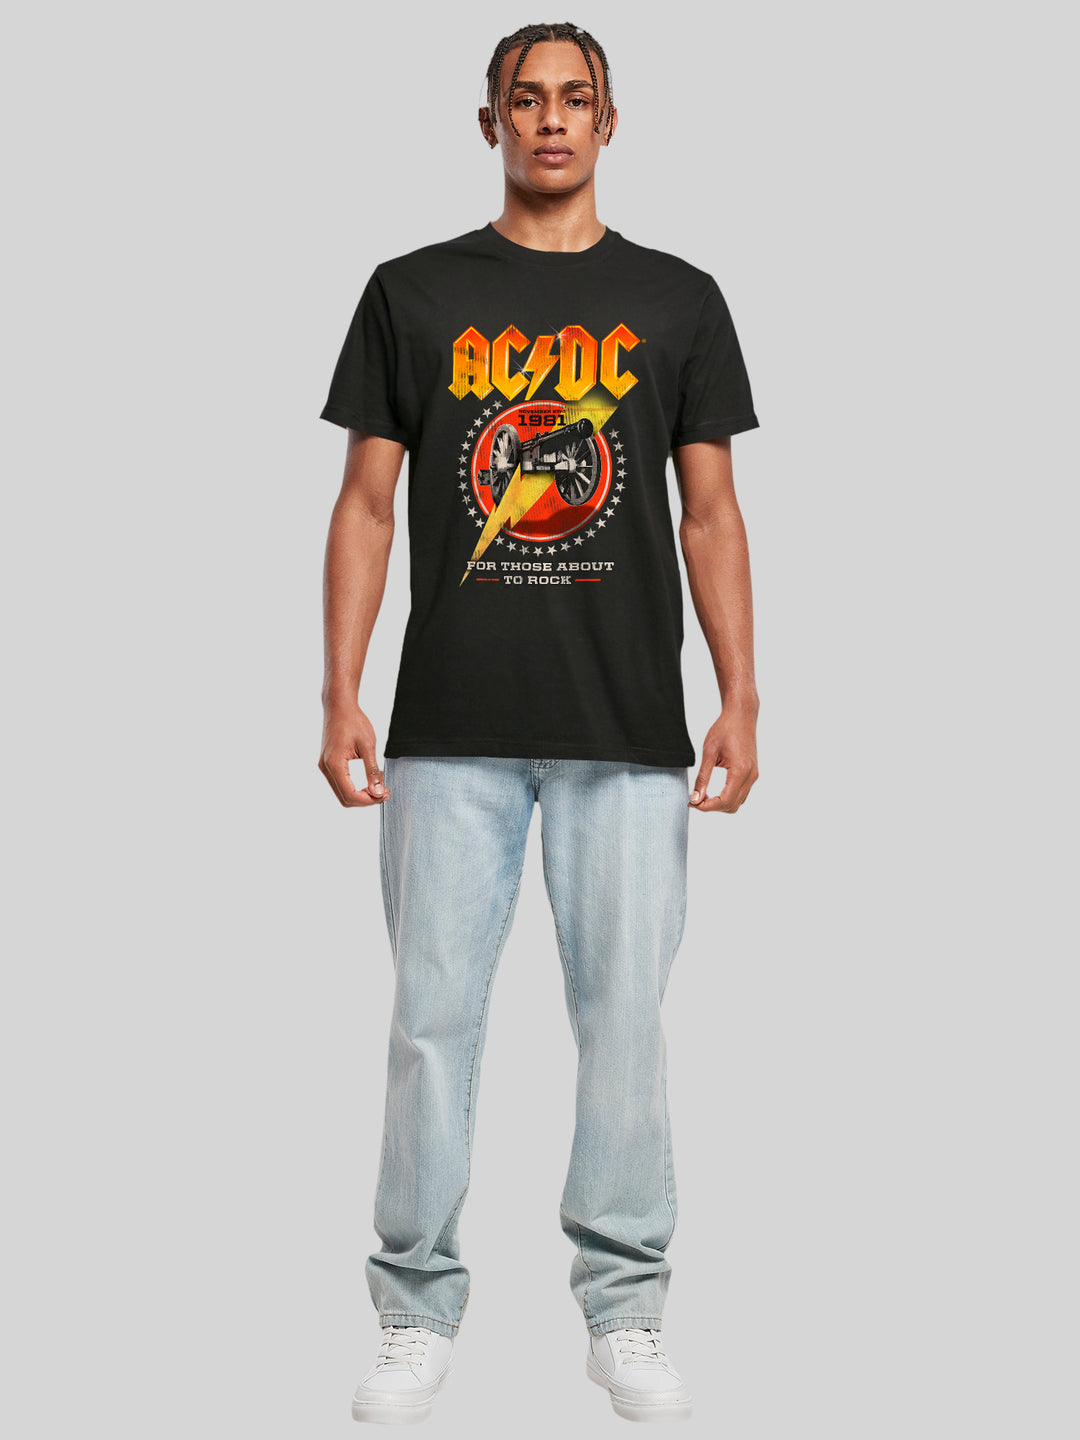 AC/DC "For Those About To Rock 1981" Round Neck T-Shirt – Express Your Rock 'n' Roll Soul with Style